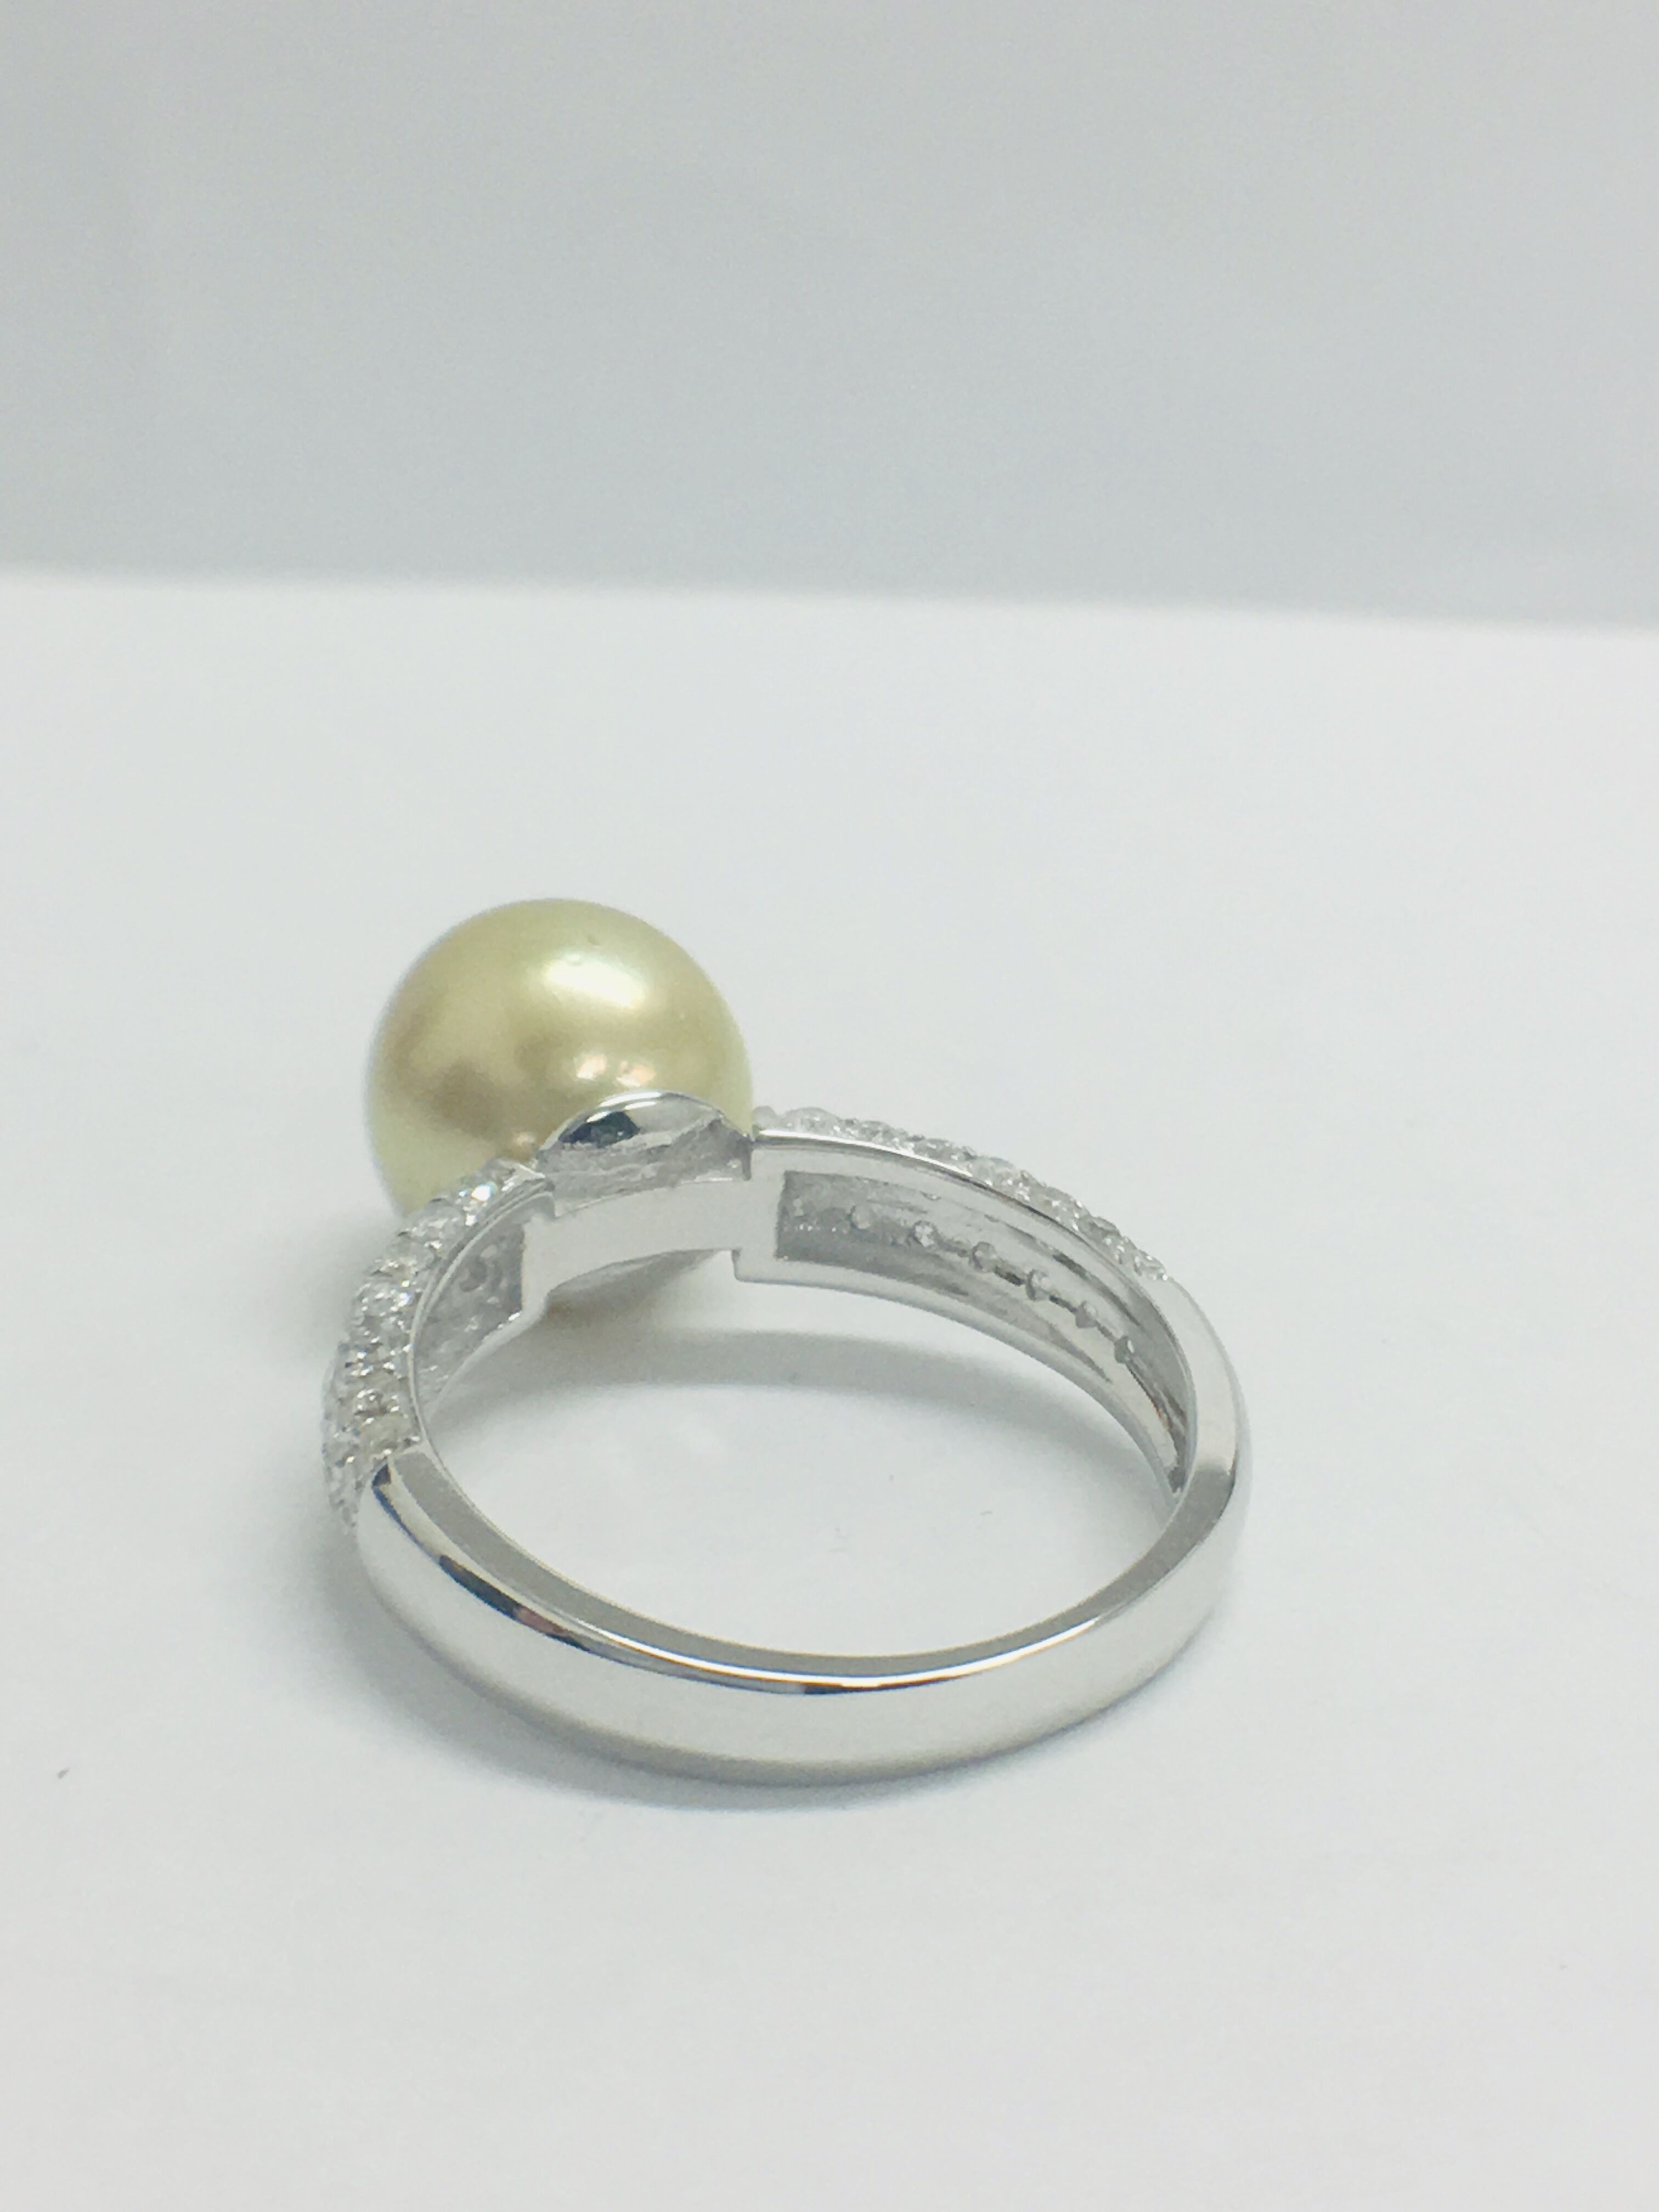 14ct White Gold Pearl & Diamond Ring - Image 6 of 11